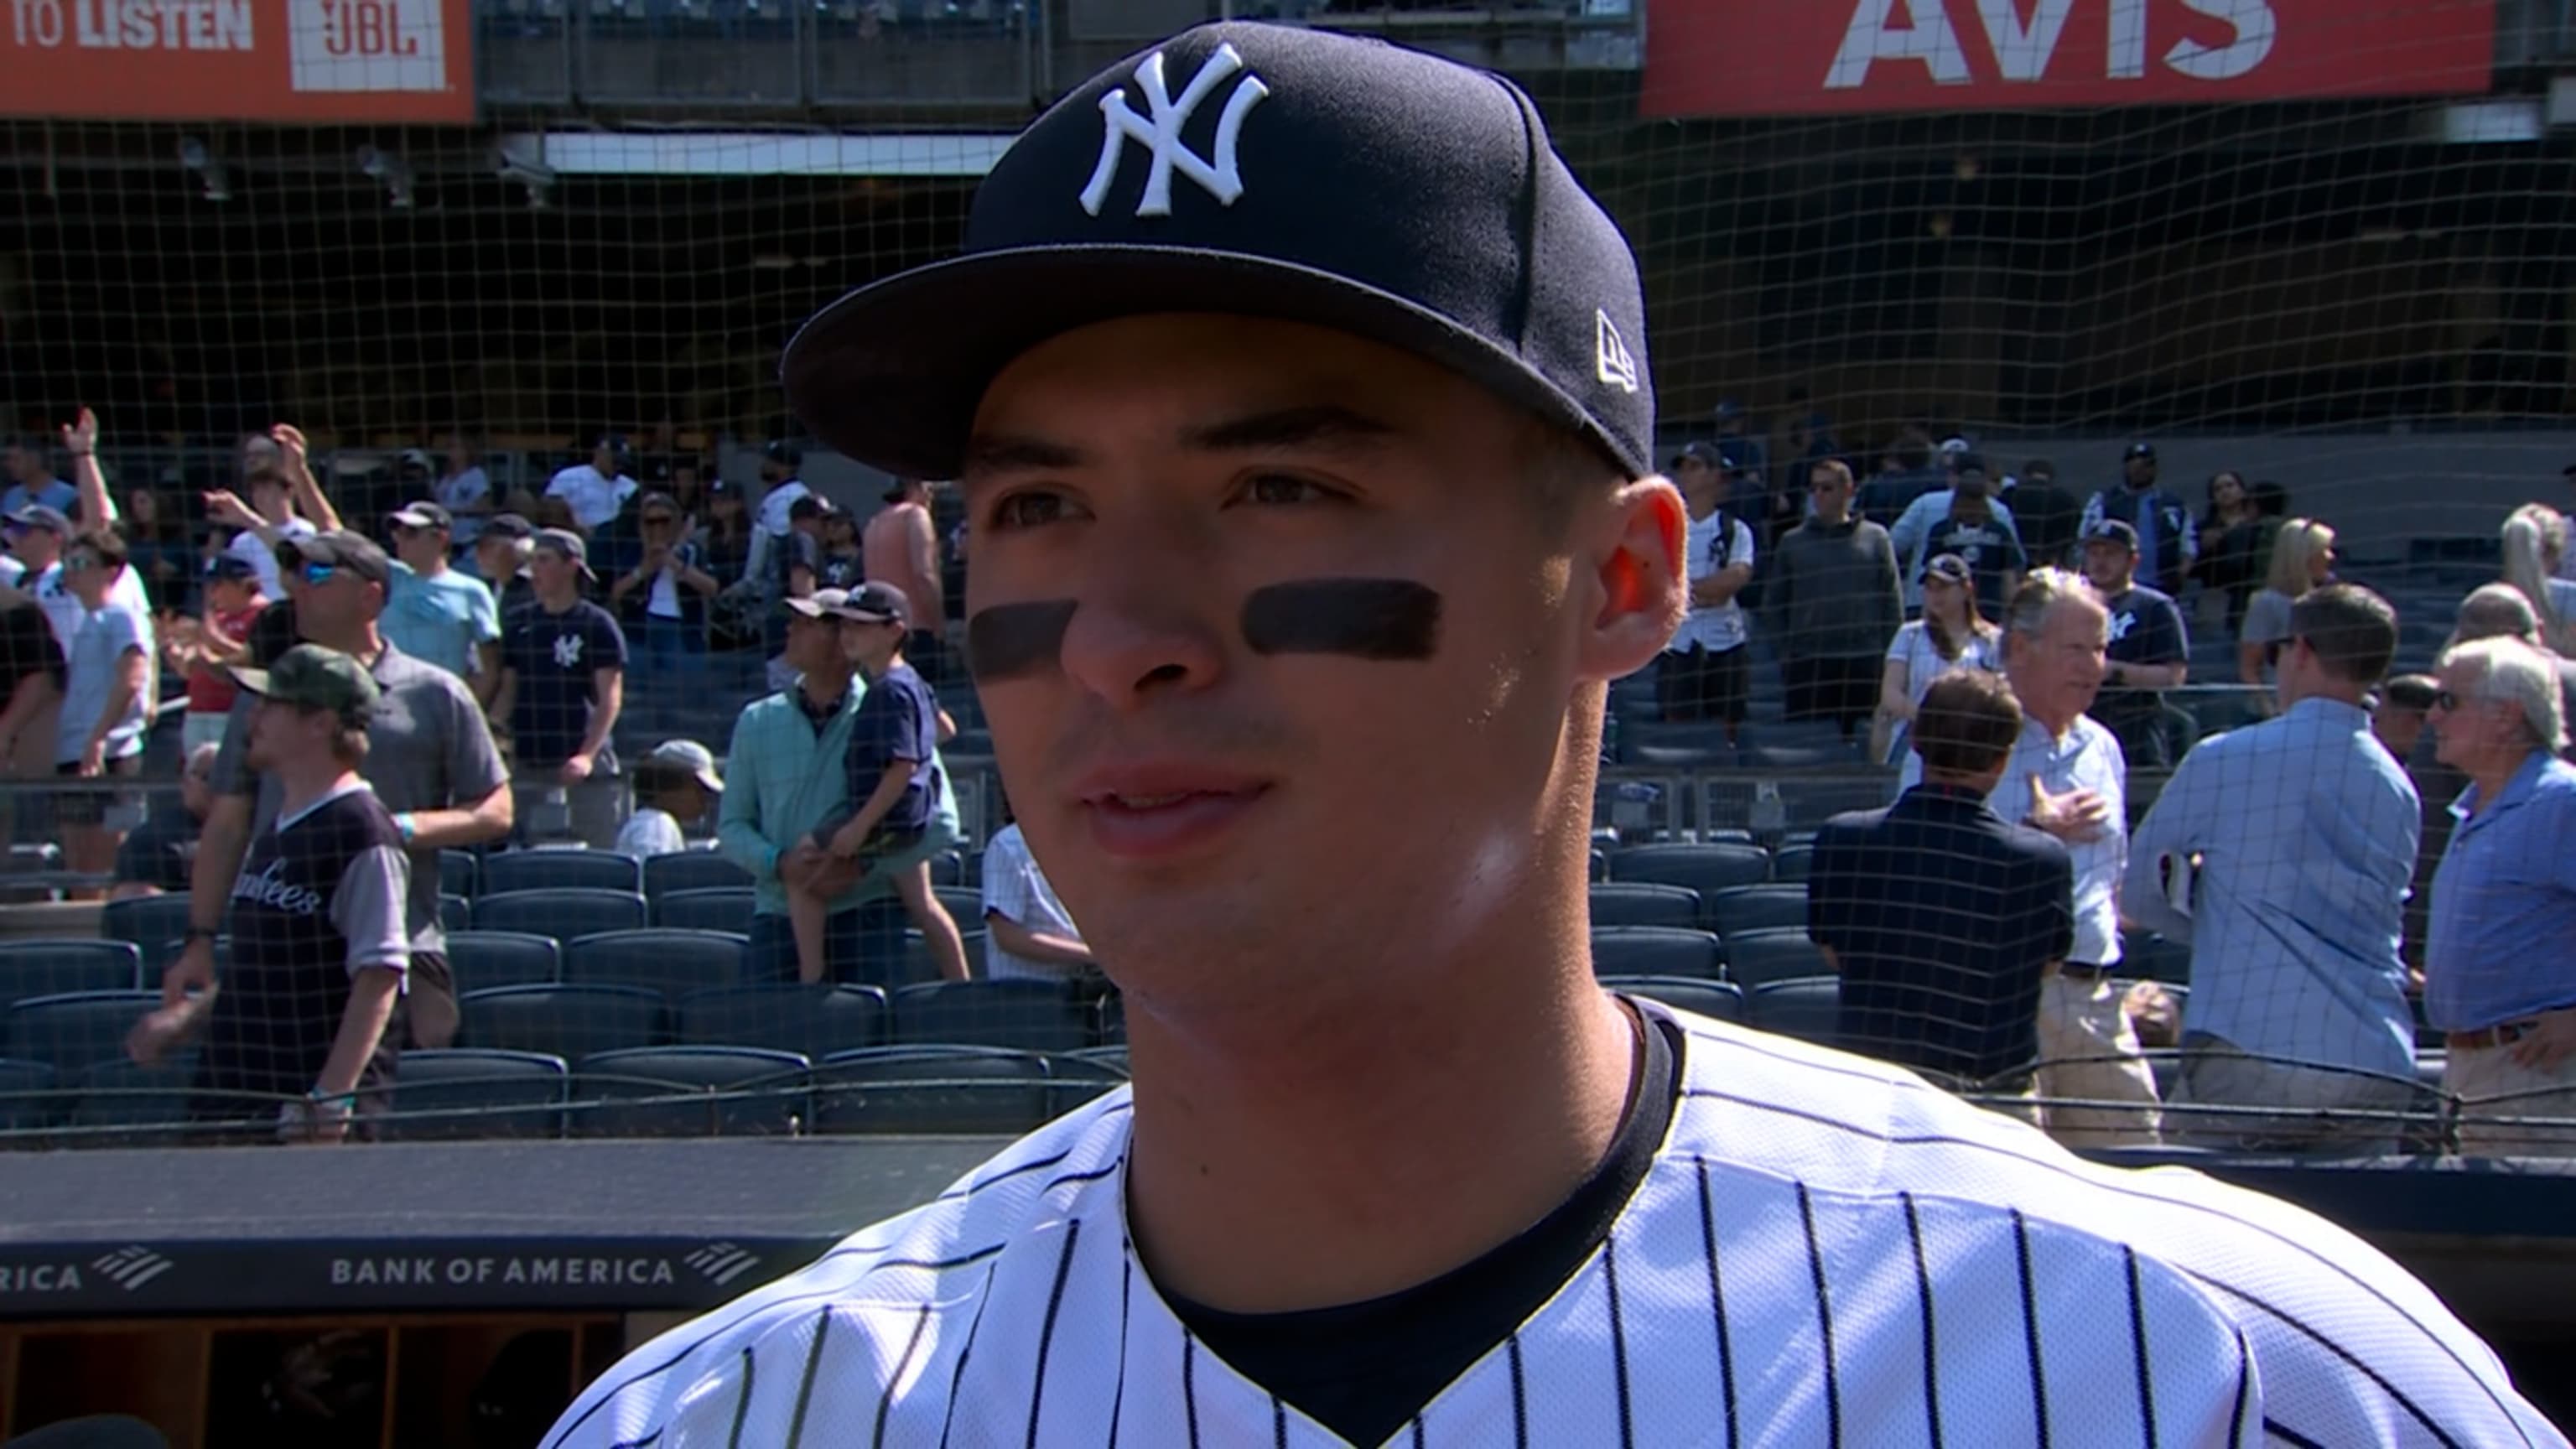 Is Anthony Volpe the Next Derek Jeter? We Asked MLB The Show 23 